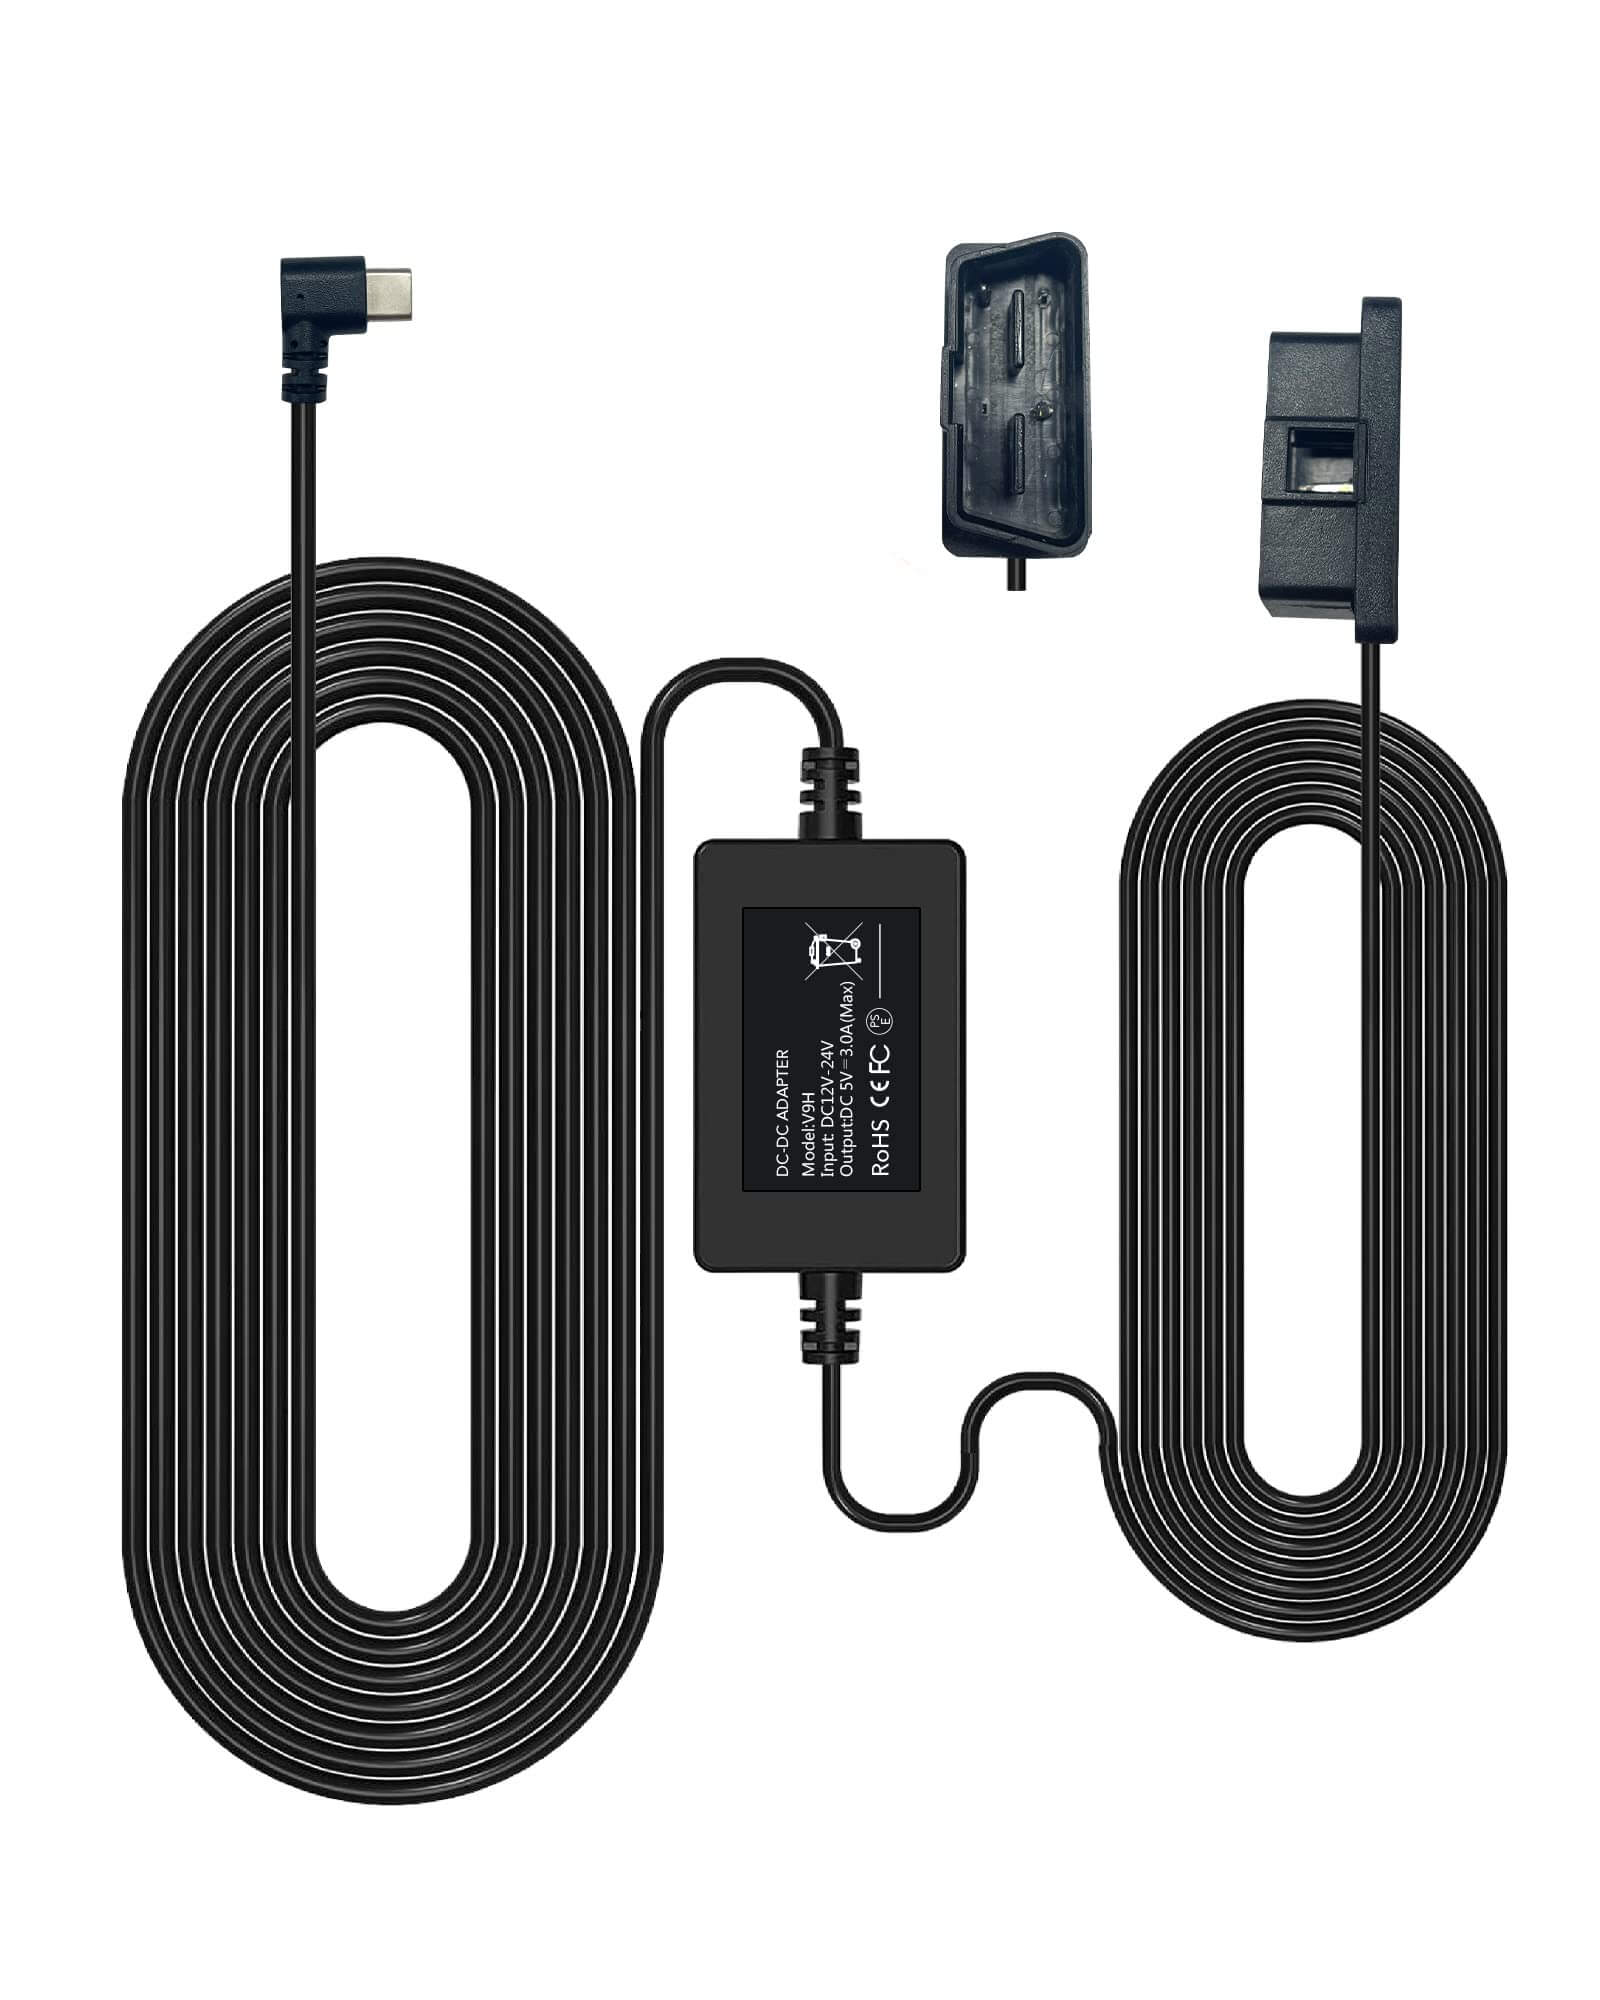 WOLFBOX Dashcam Multifunctional Hardwire Kit For G900 Parking Mode Accessory WOLFBOX OBD hardwire kit-11.5ft  